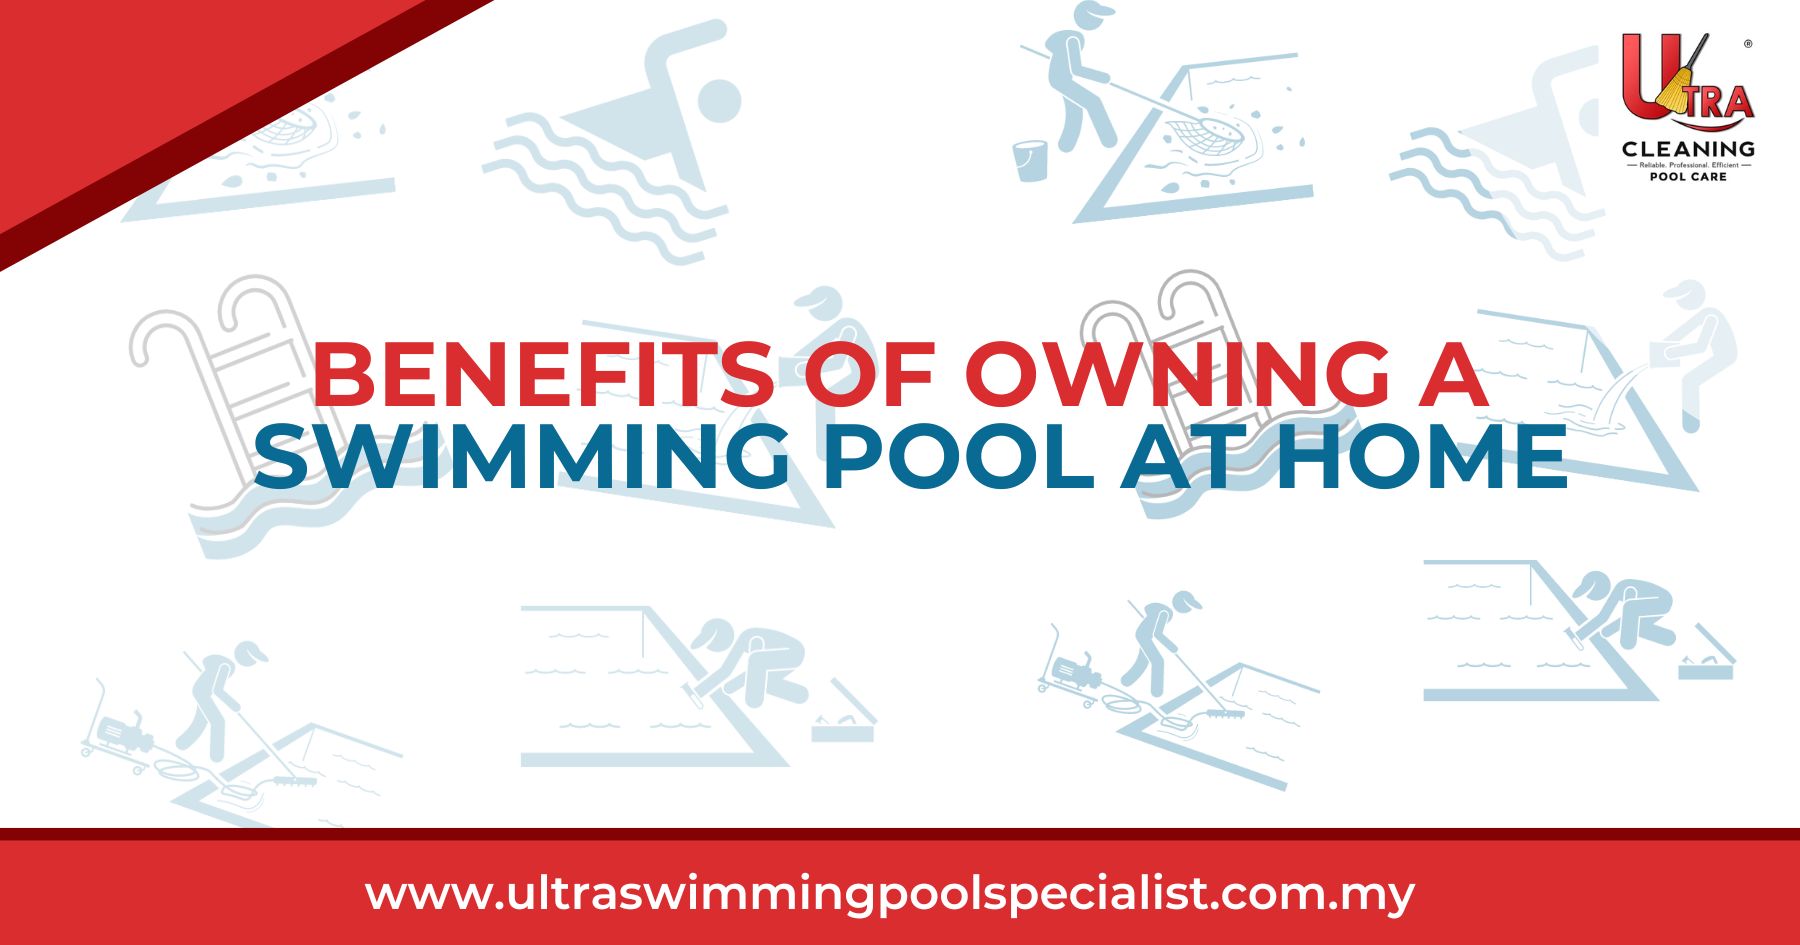 Benefits of Owning a Swimming Pool at Home